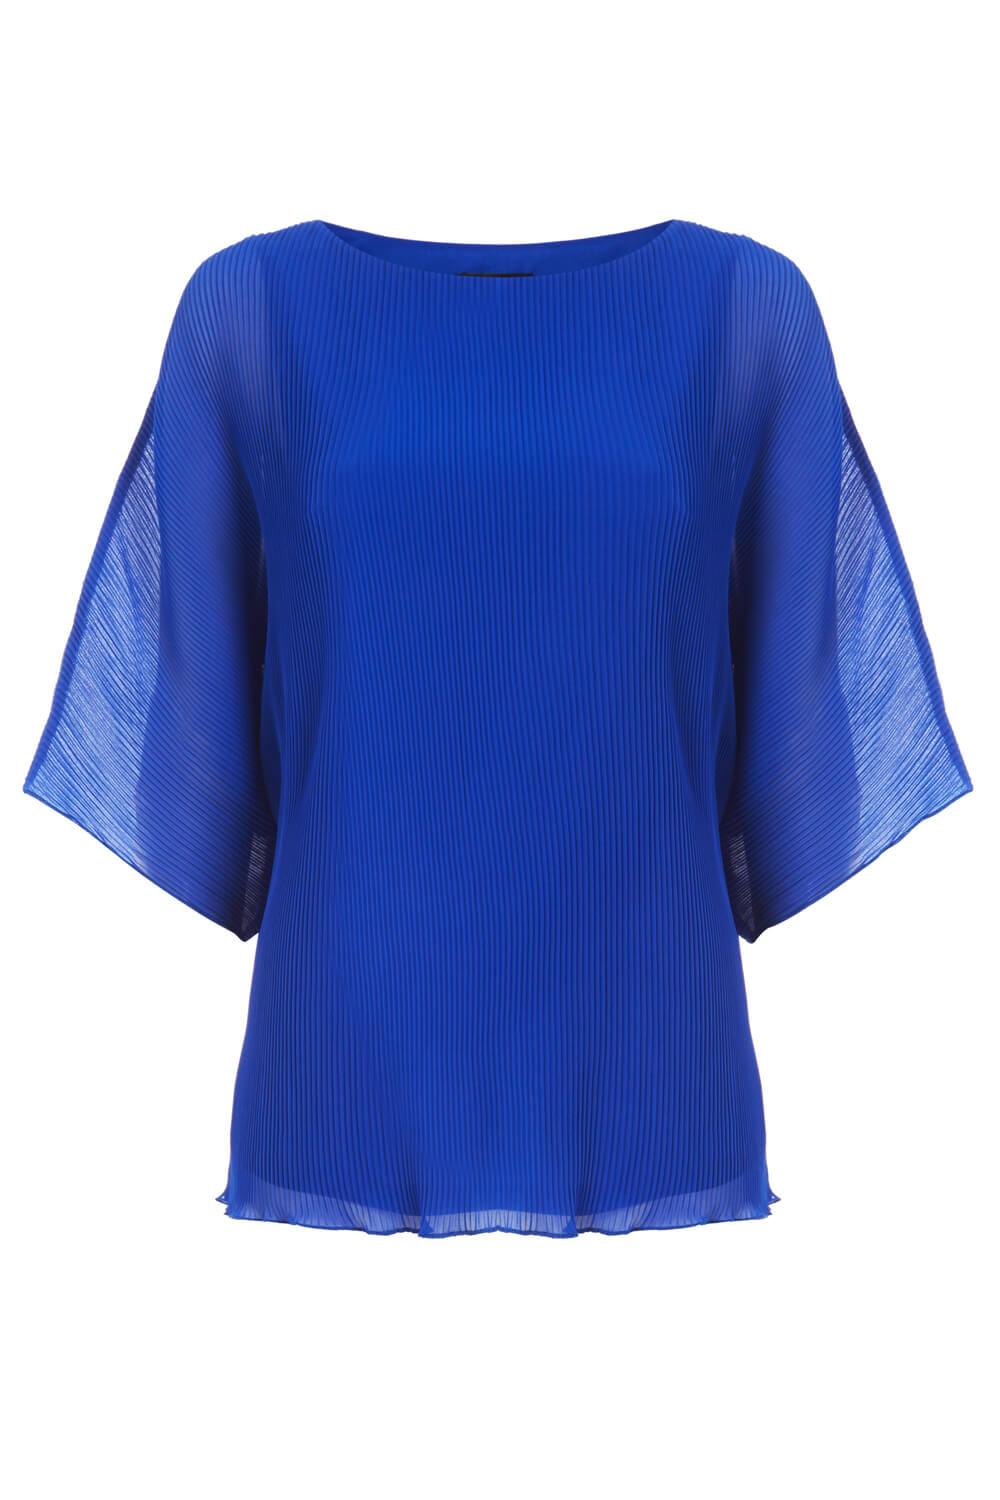 Royal Blue Pleated Chiffon Overlay Top, Image 4 of 8